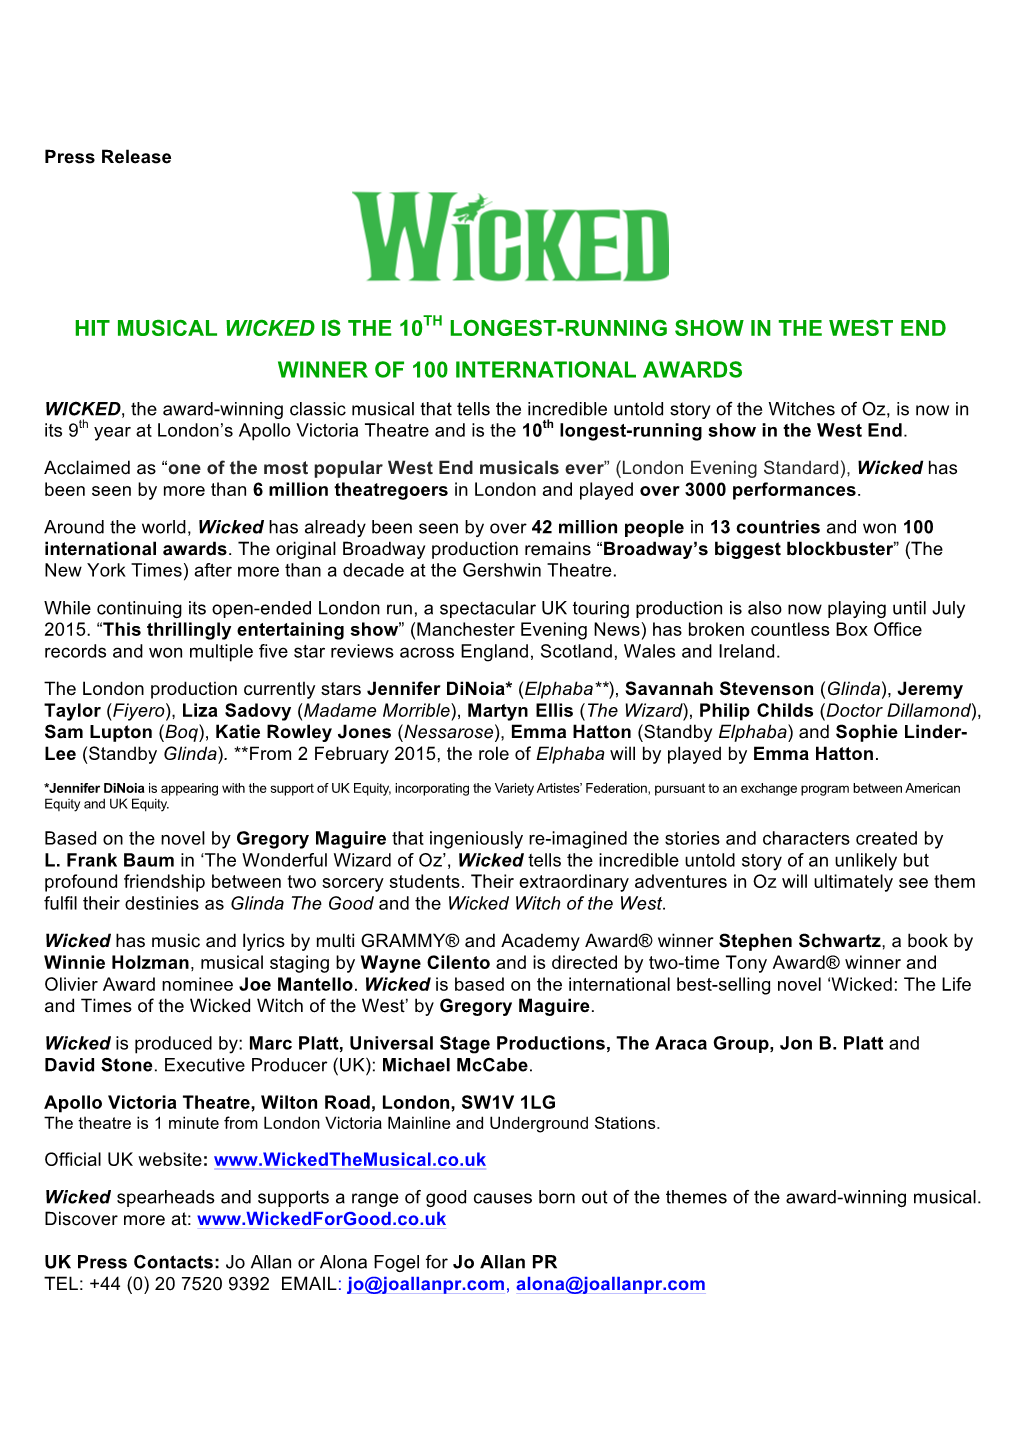 Hit Musical Wicked Is the 10Th Longest-Running Show in the West End